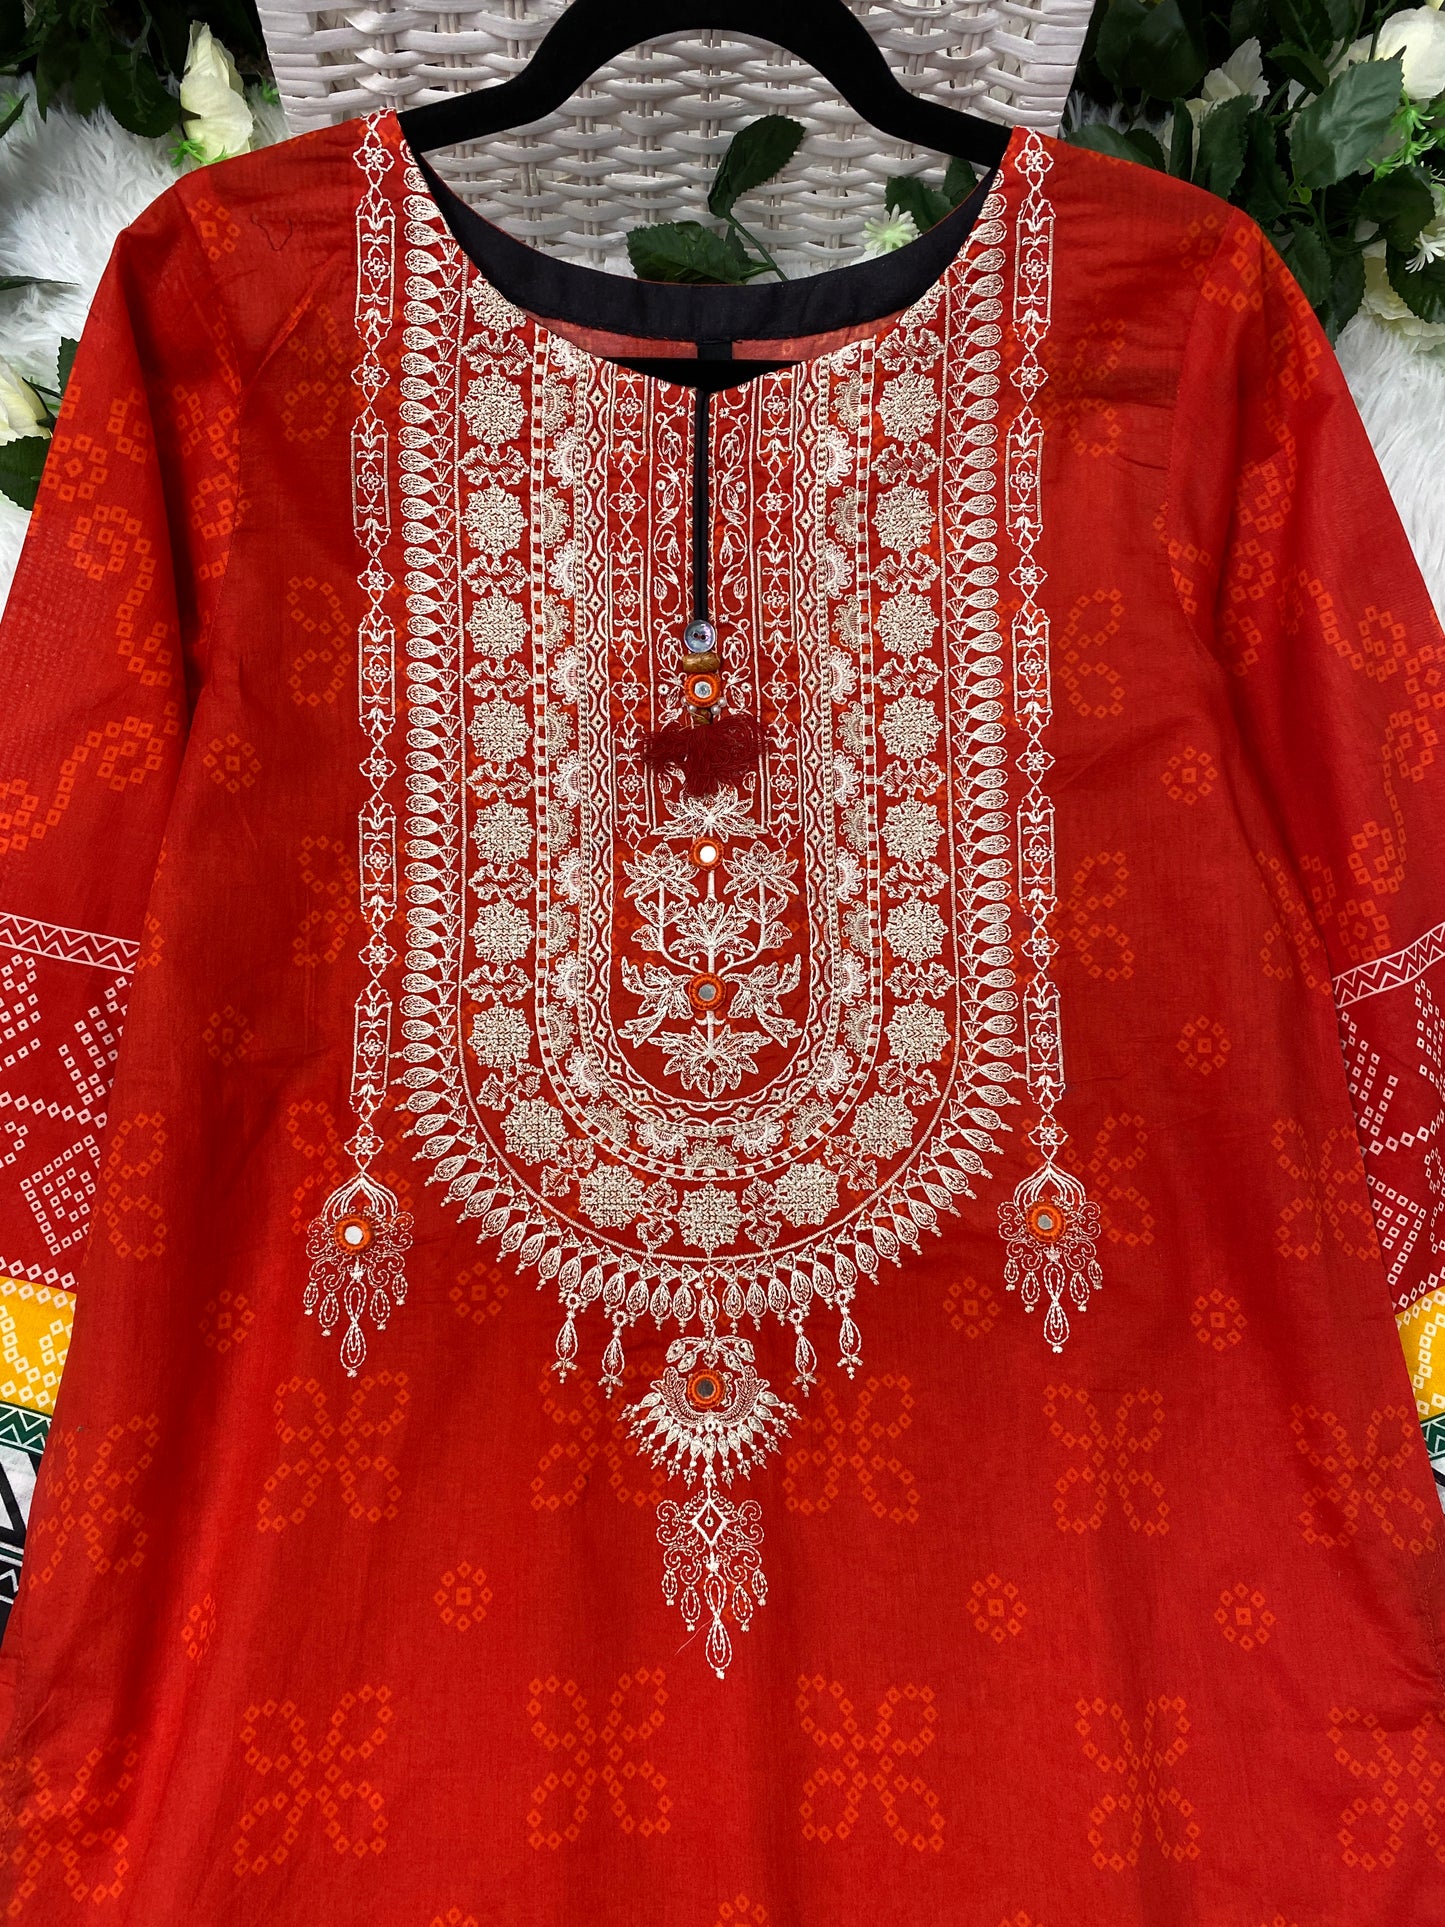 WARDA Embroidered Top Small